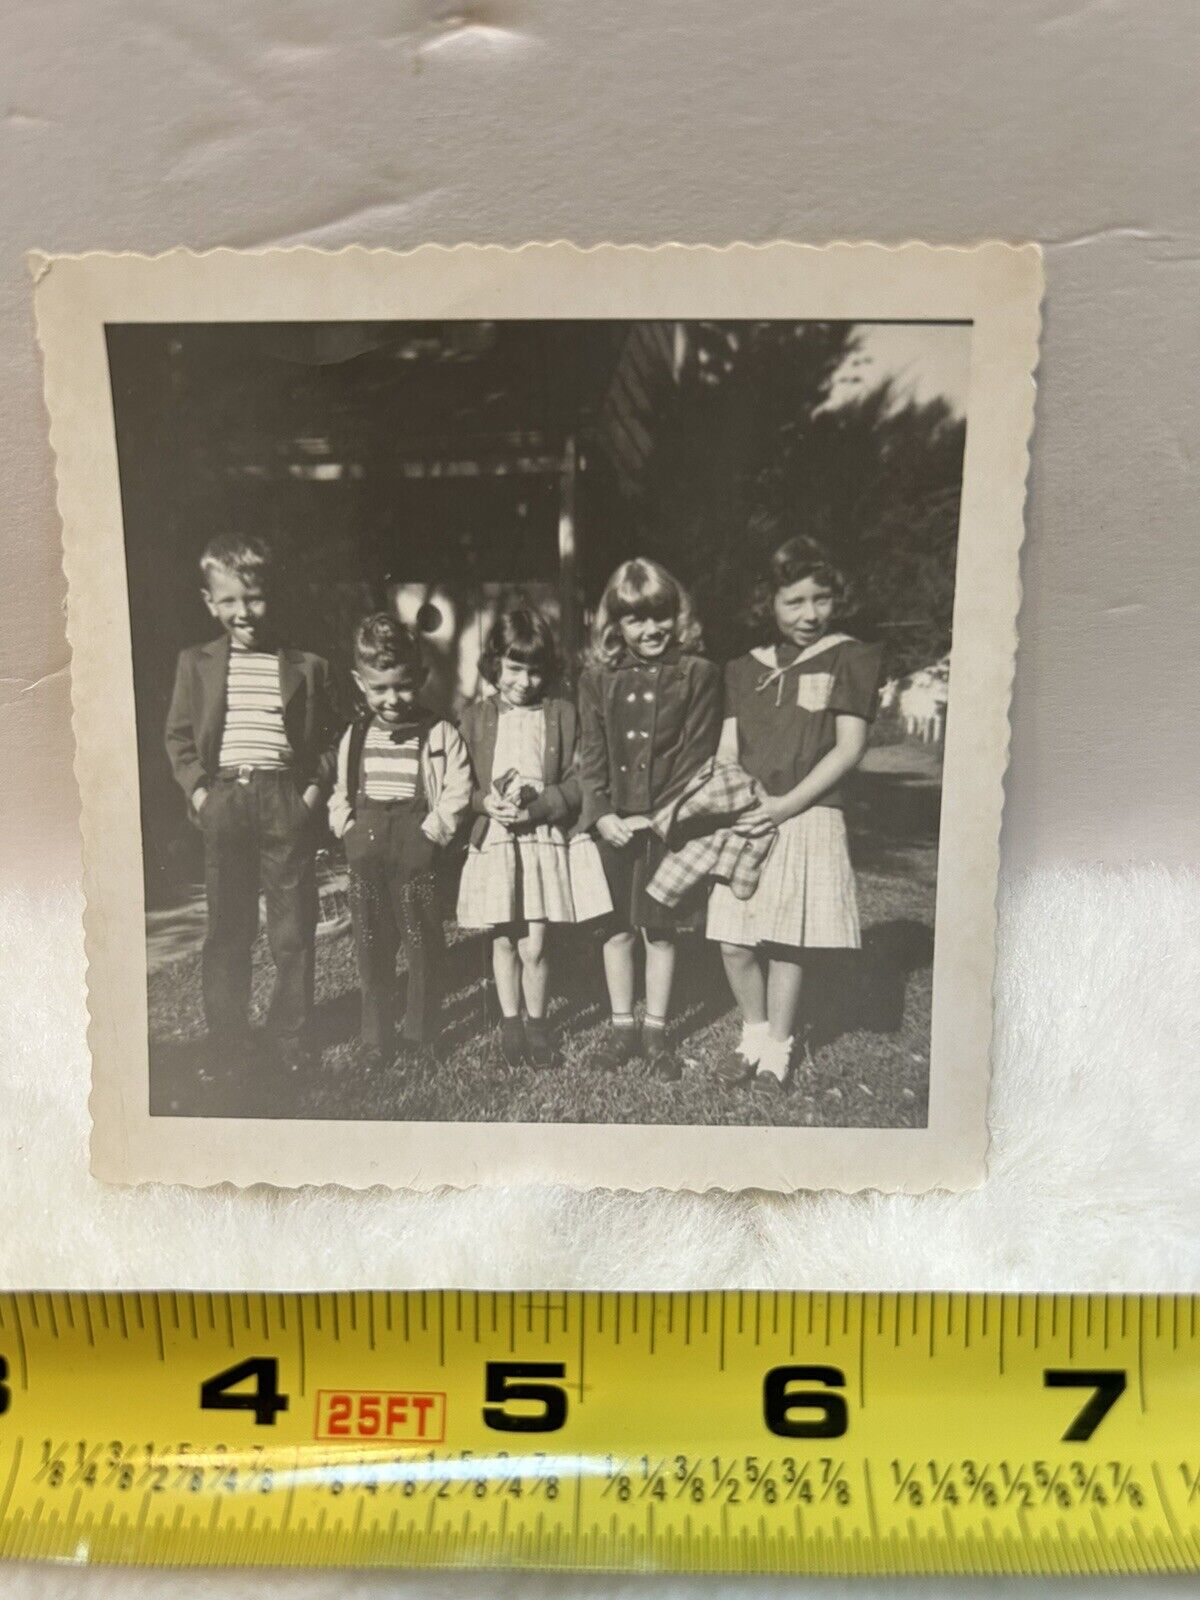 Vintage Photo Snapshot Of Young Boys And Girls With Cute Outfits 